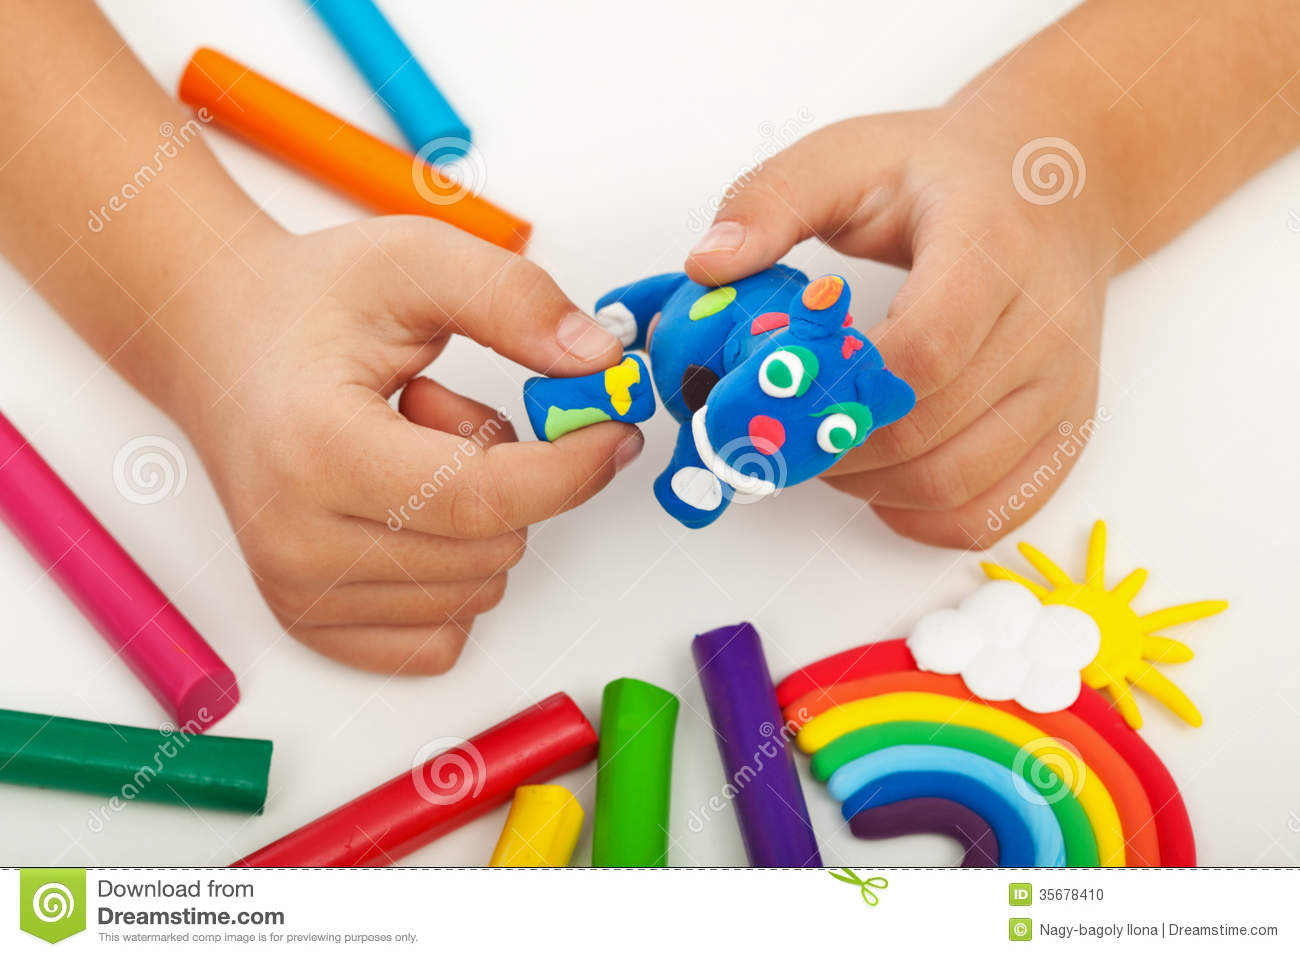 Child Playing With Colorful Clay Making Animal Figures   Closeup On